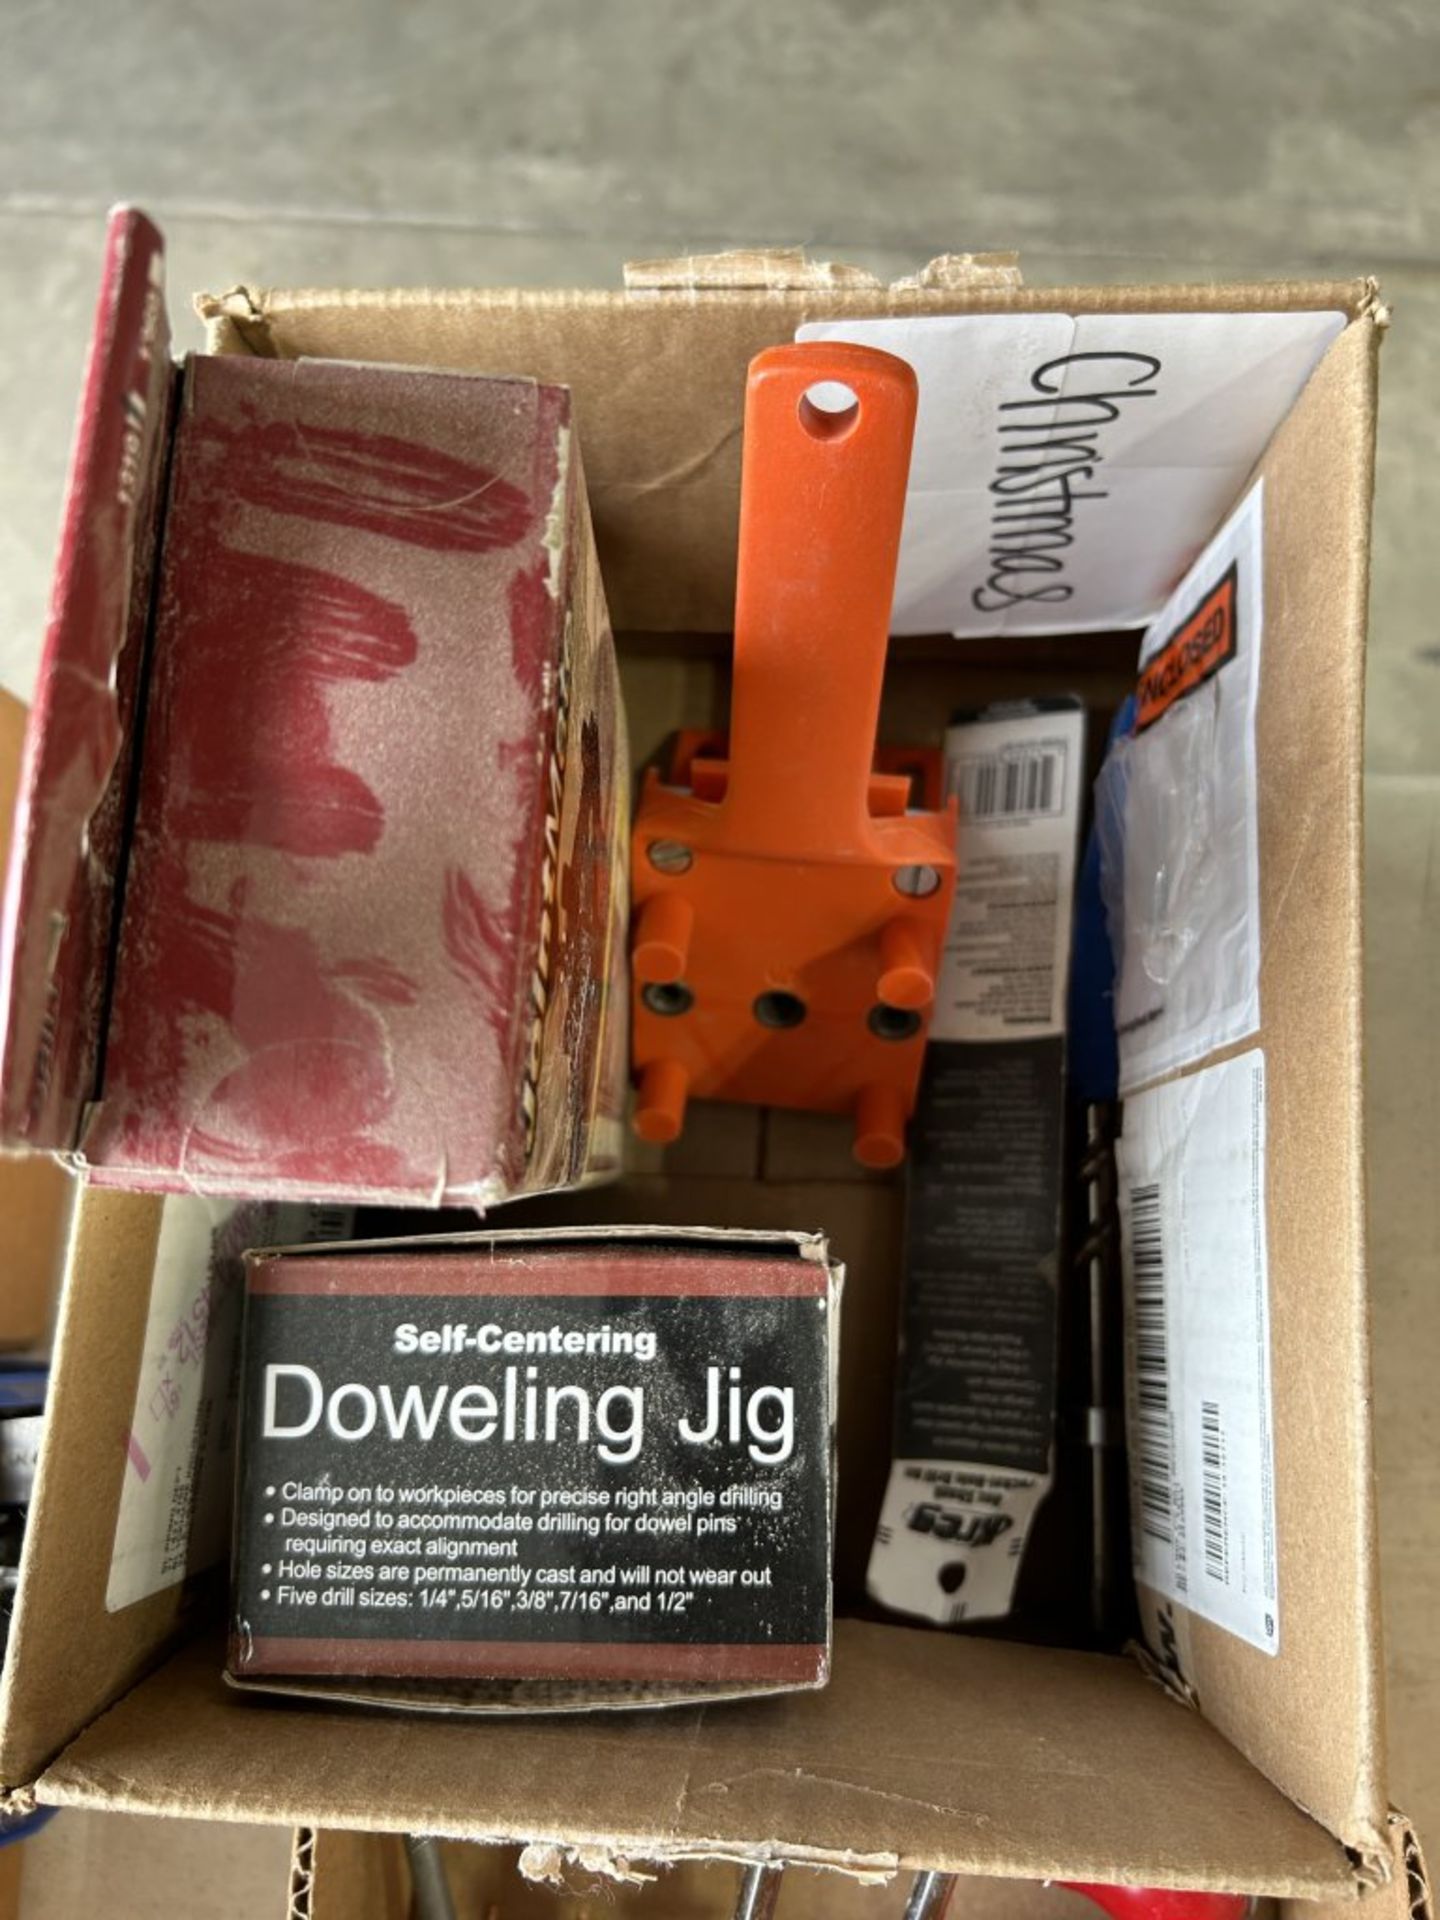 ASSORTED ALLEN WRENCHES, SCREWDRIVERS, DOWELING JIG, ETC. - Image 4 of 7